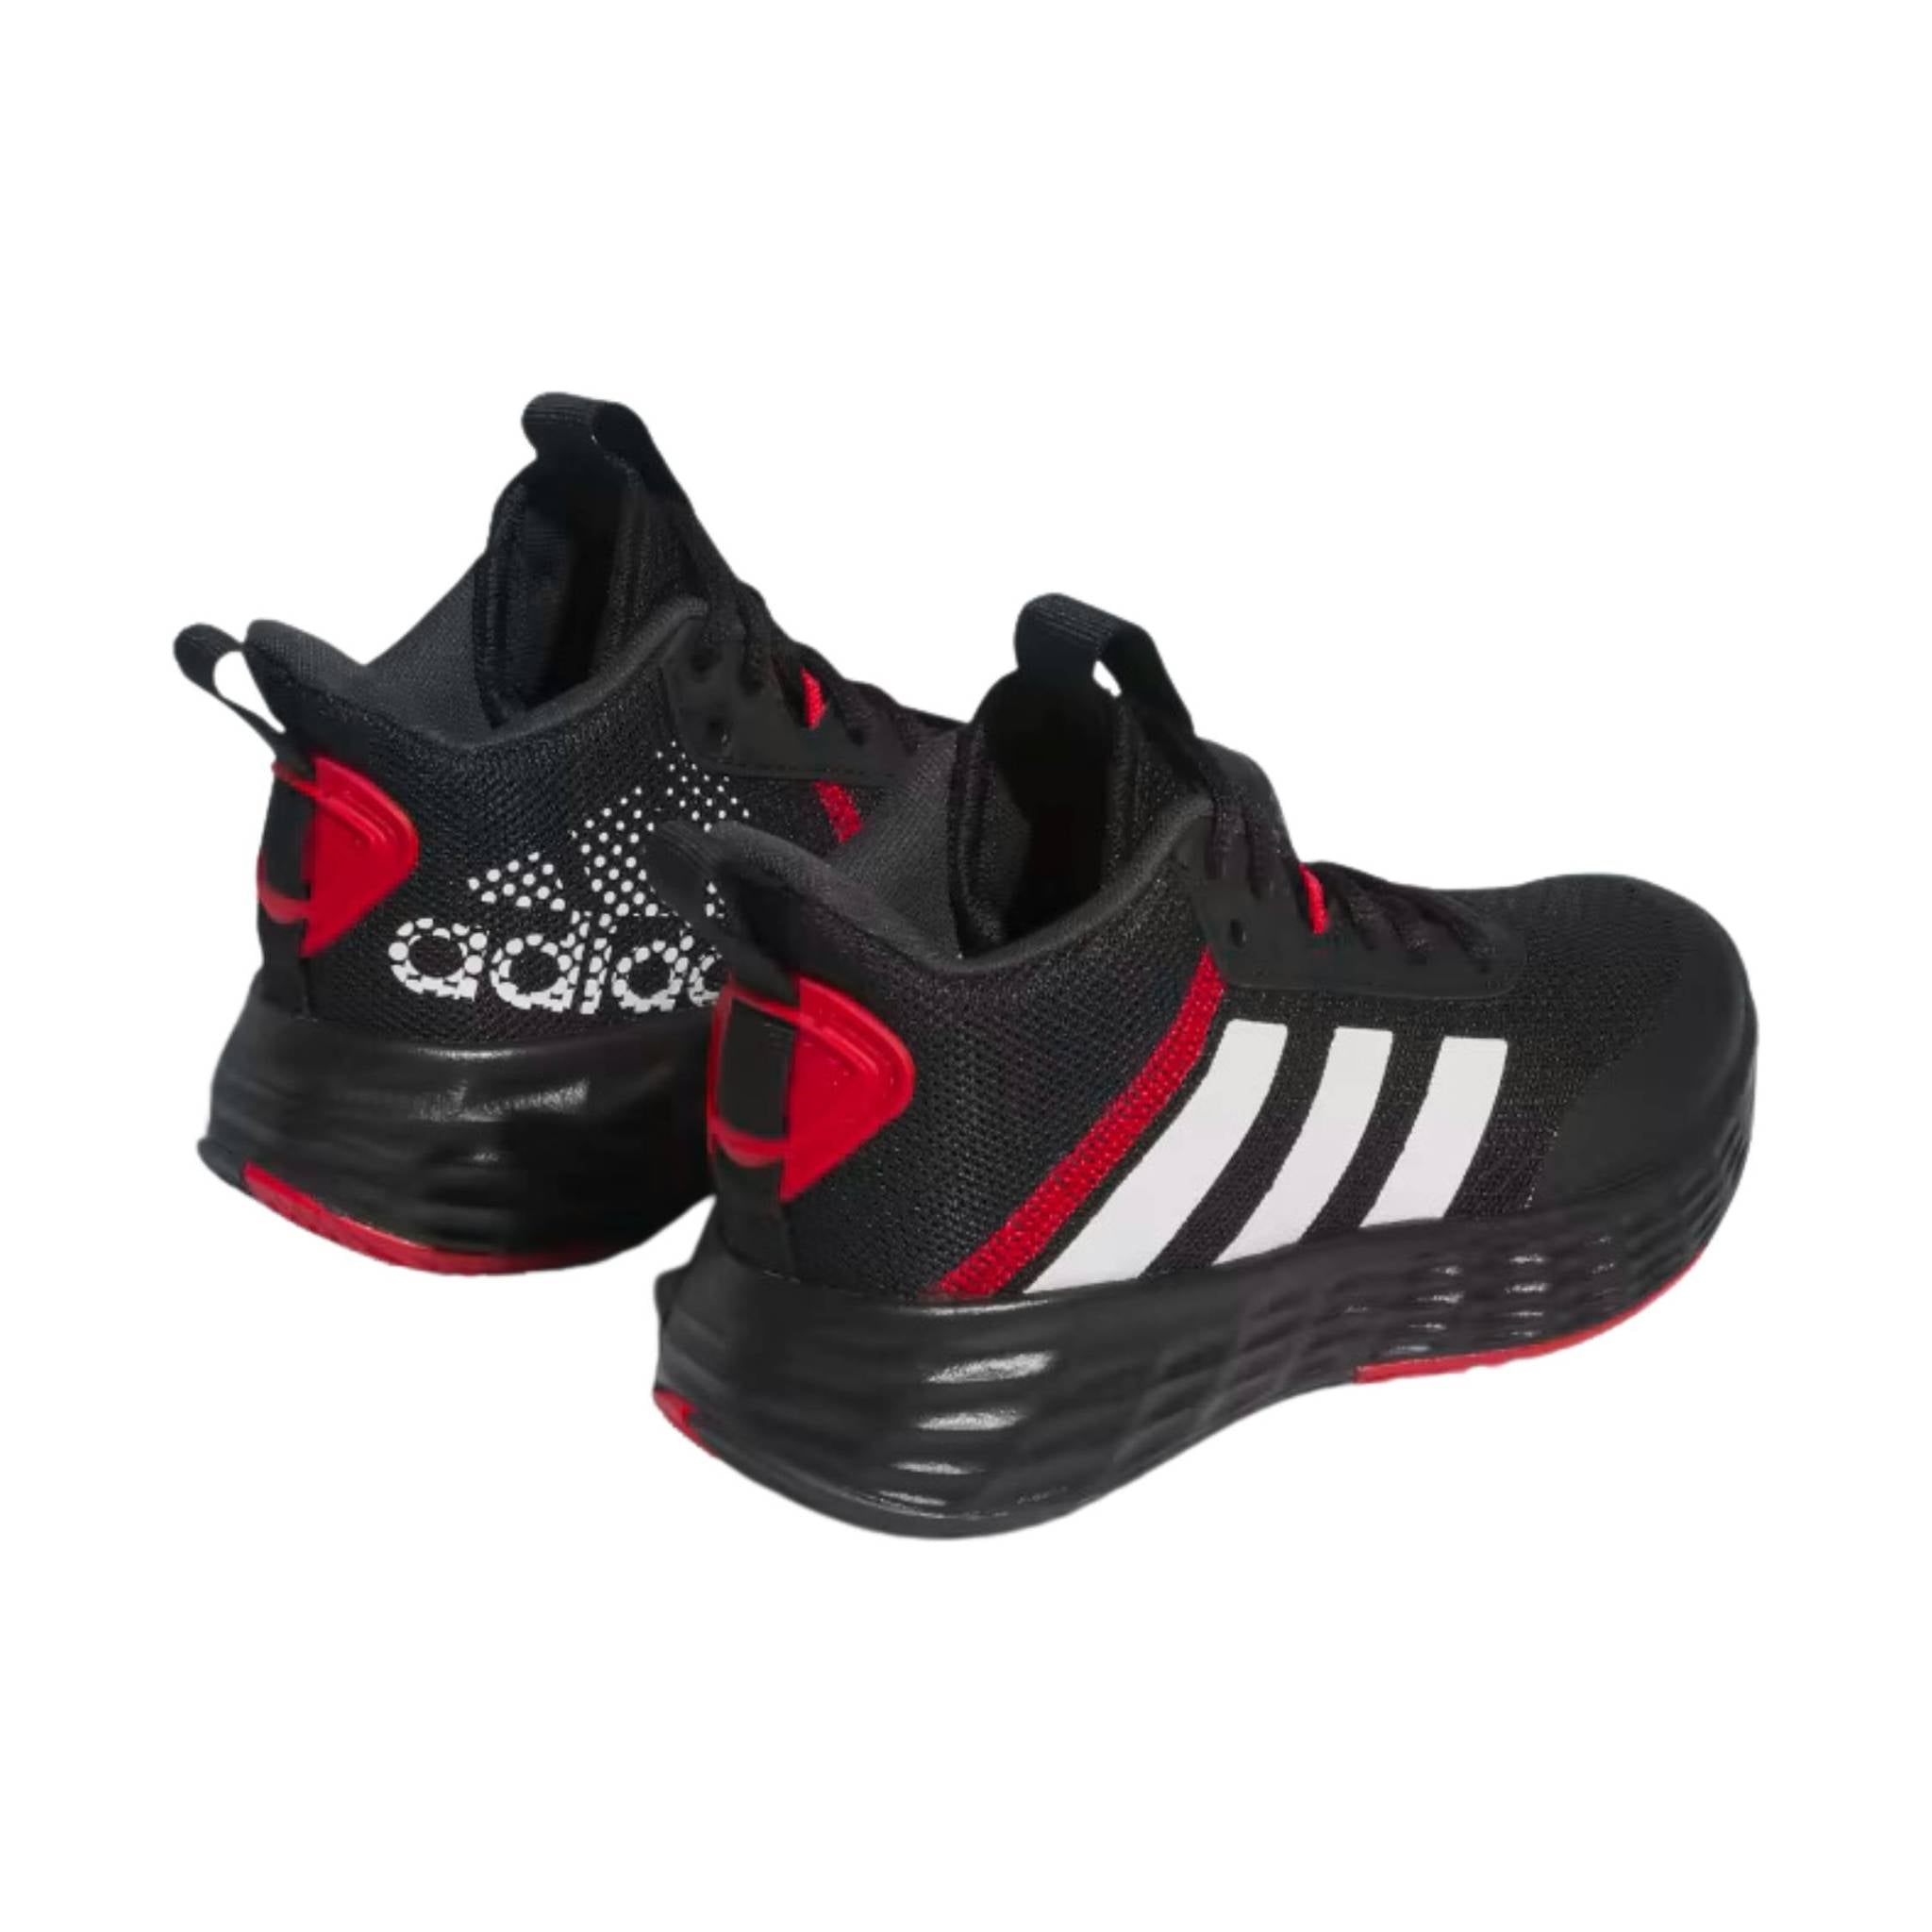 adidas basketball shoes red black white